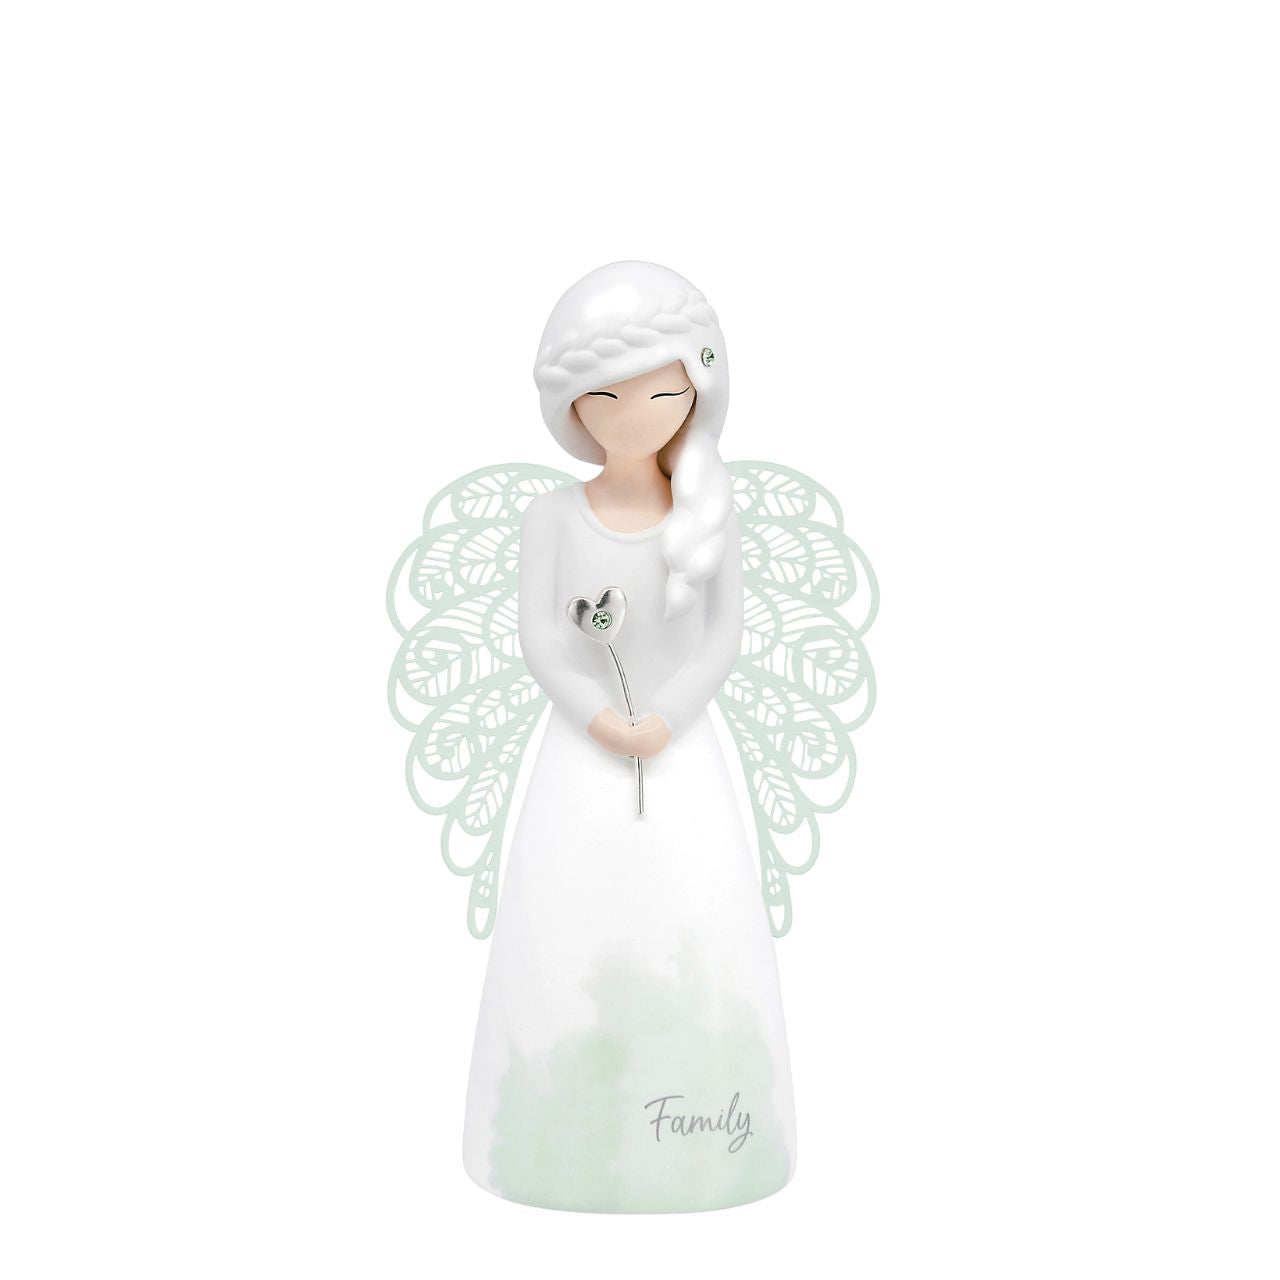 Thank You Angel Figurine - Family  Looking for a thoughtful gift that's both beautiful and meaningful? These stunning angels are the perfect way to show someone special just how much they mean to you. Standing 12.5cm tall, they are perfect as a gift and home decoration.